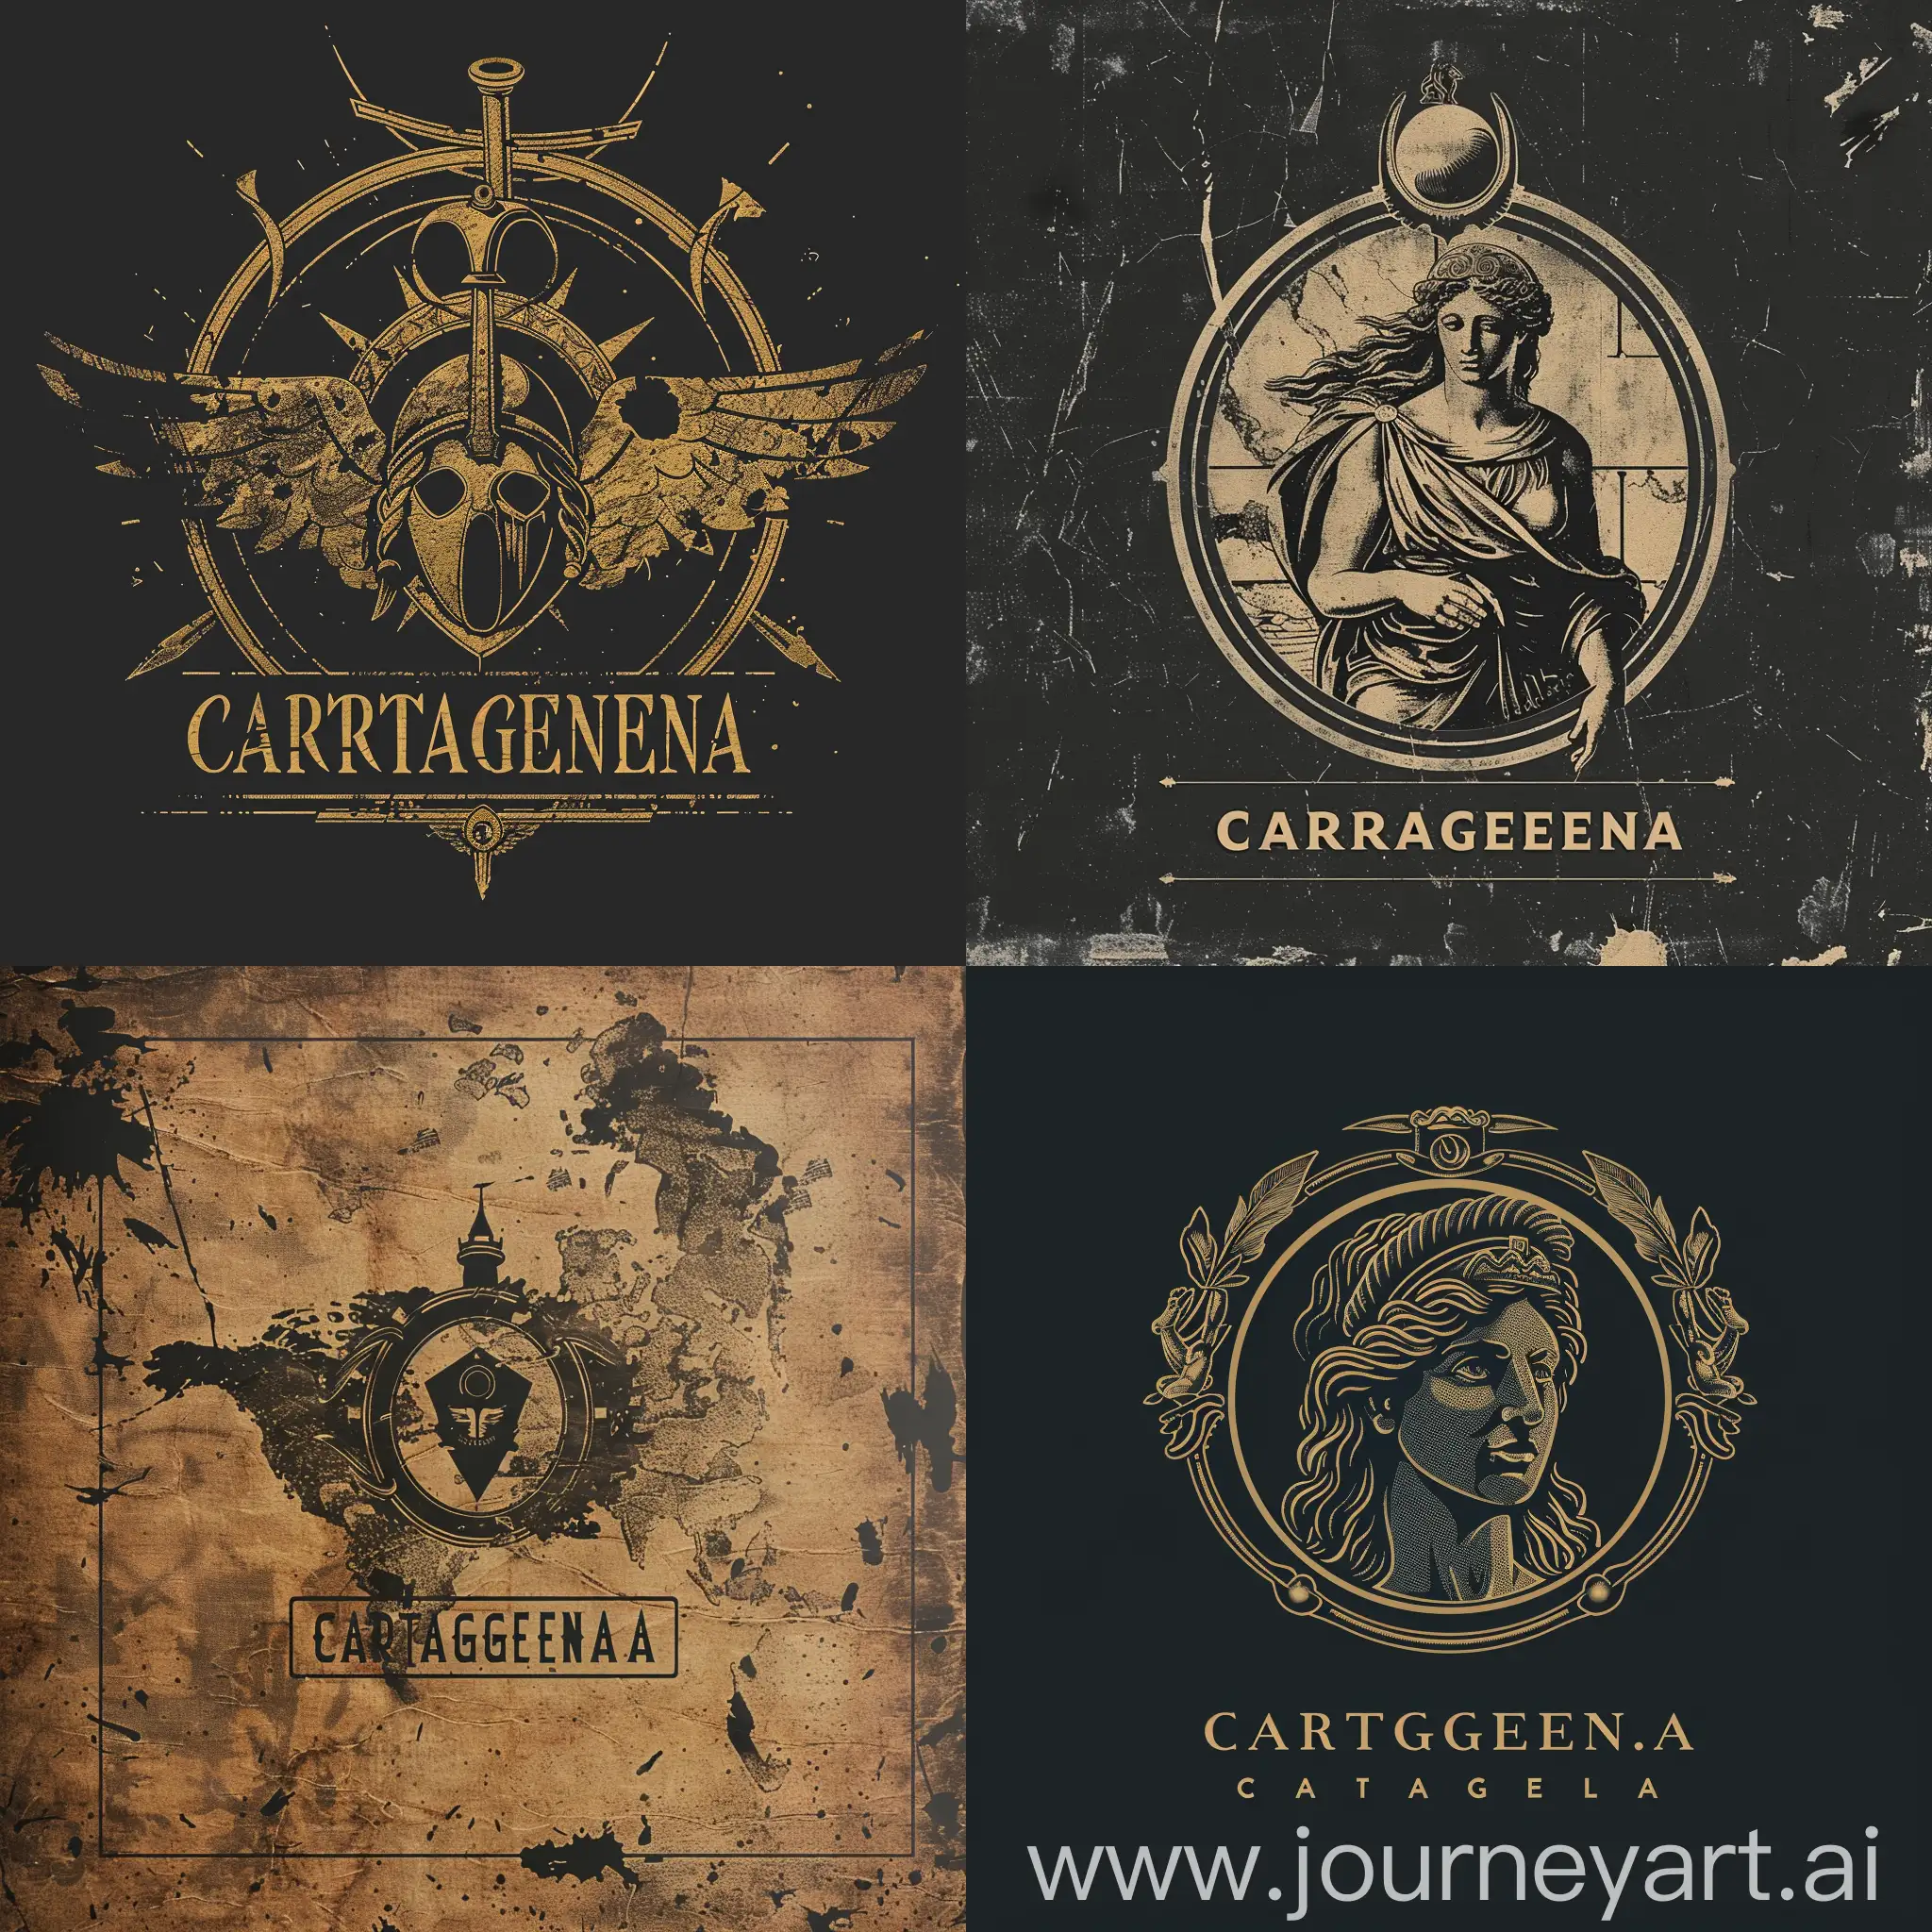 a vintage logo design for a streetwear brand called "CARTAGENA" about the ancient city of carthage